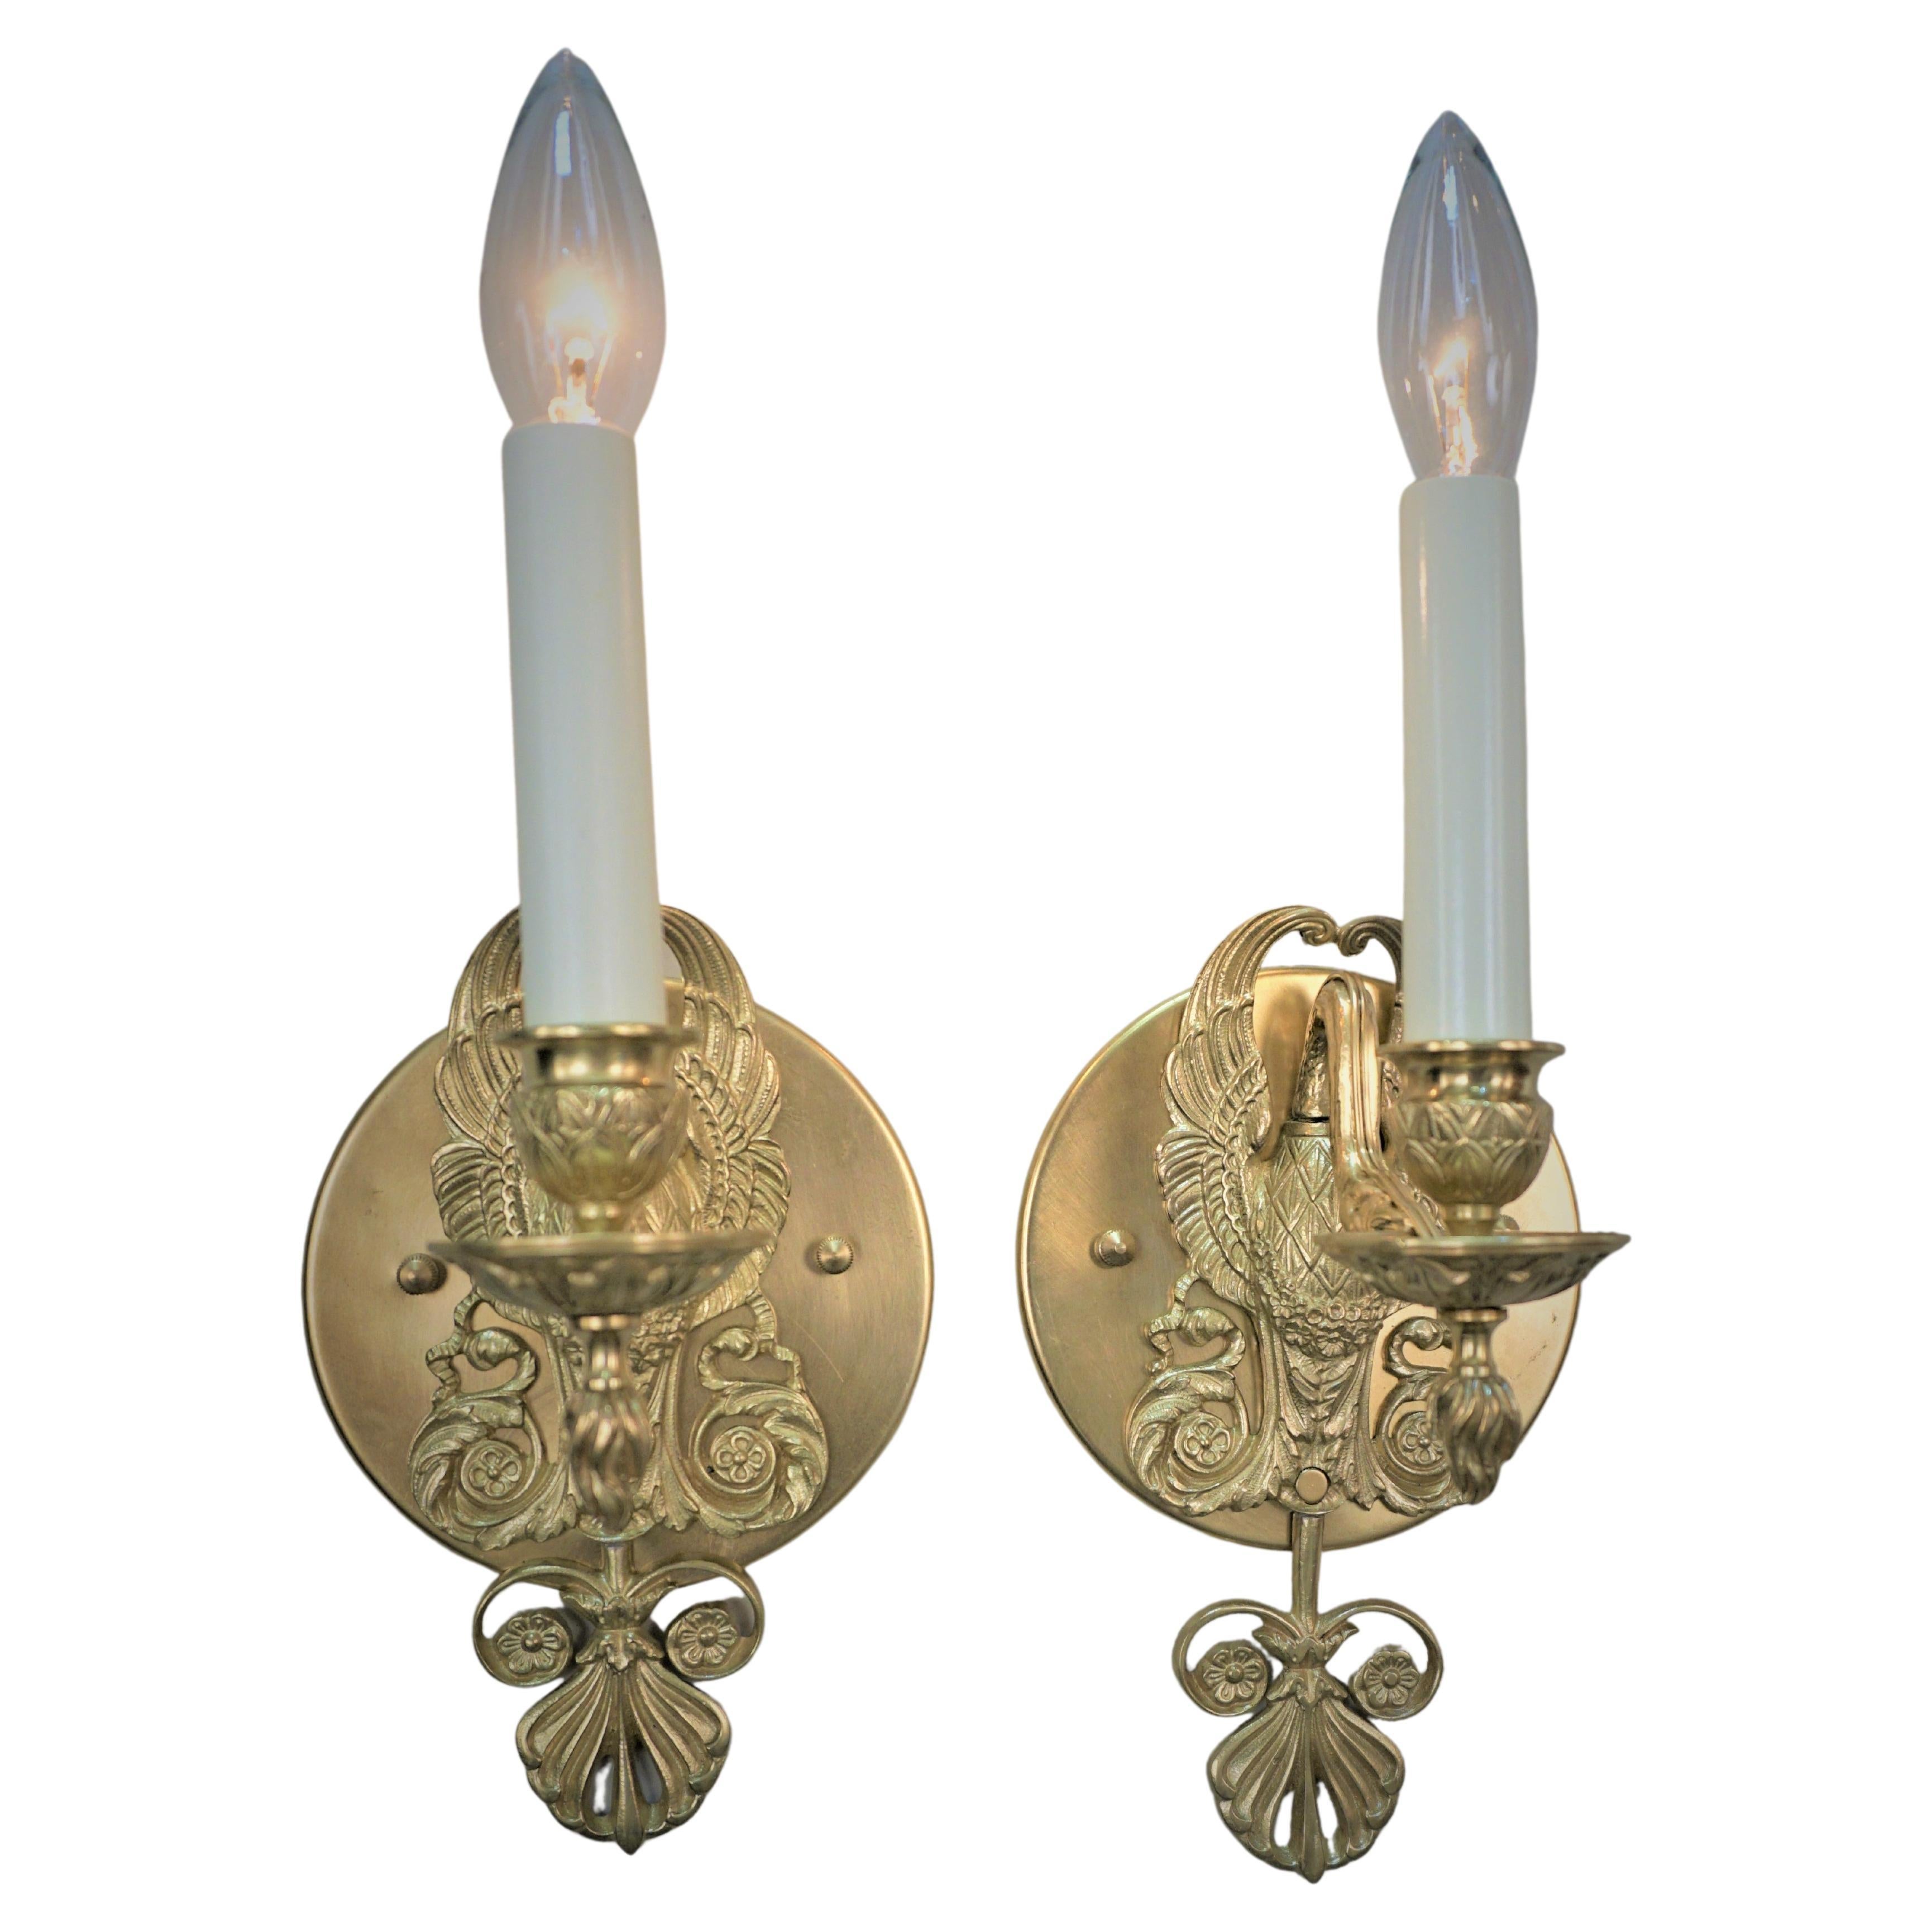 Pair of Empire Style Swam Wall Sconces